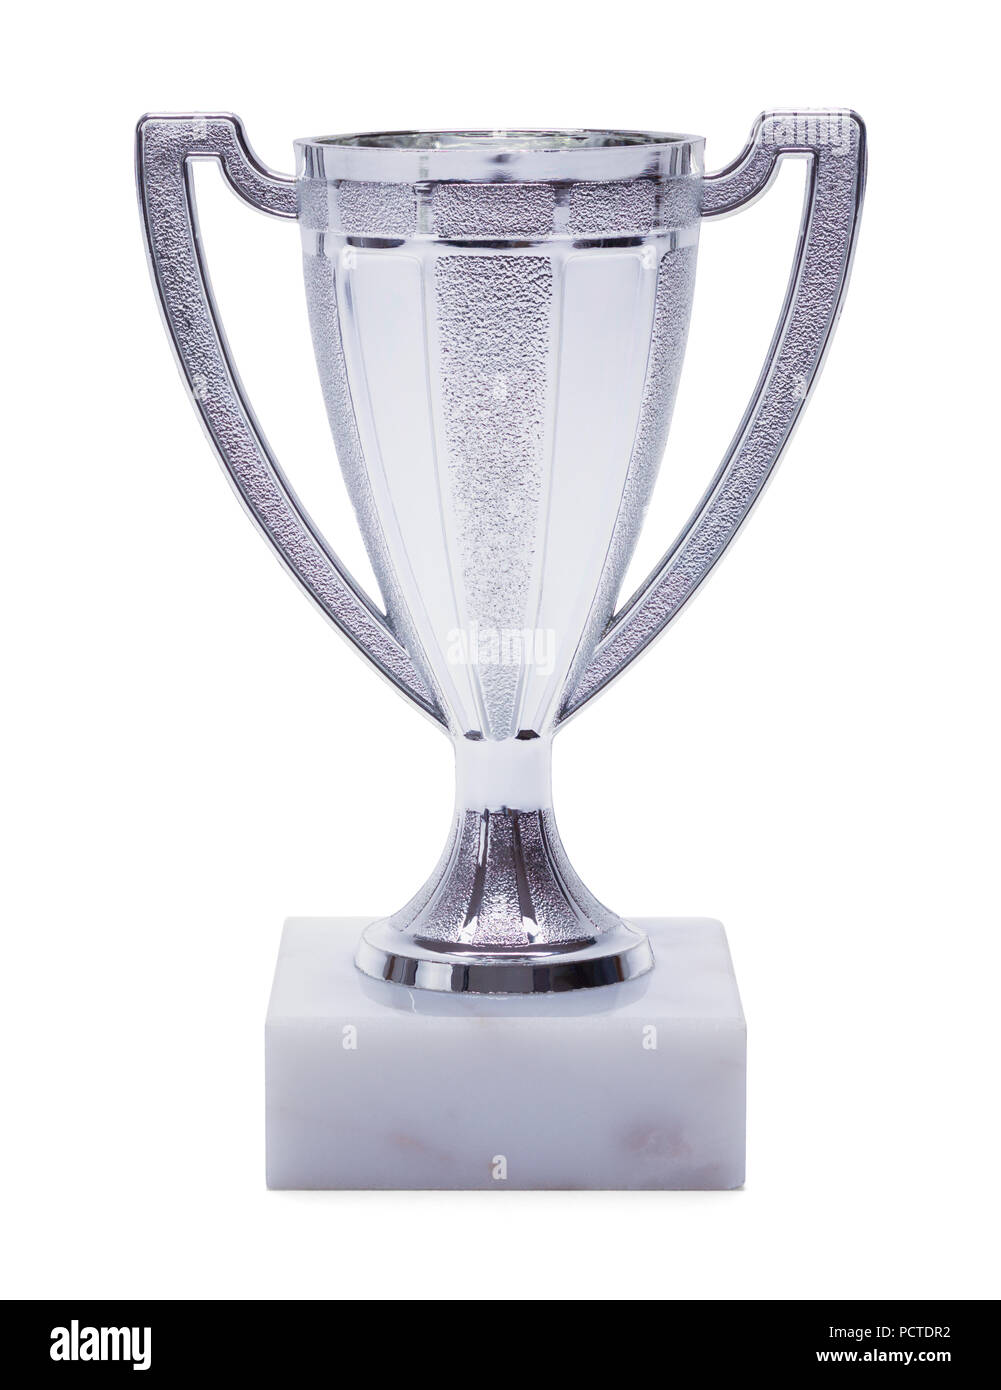 Silver Trophy Cup Isolated on a White Background. Stock Photo